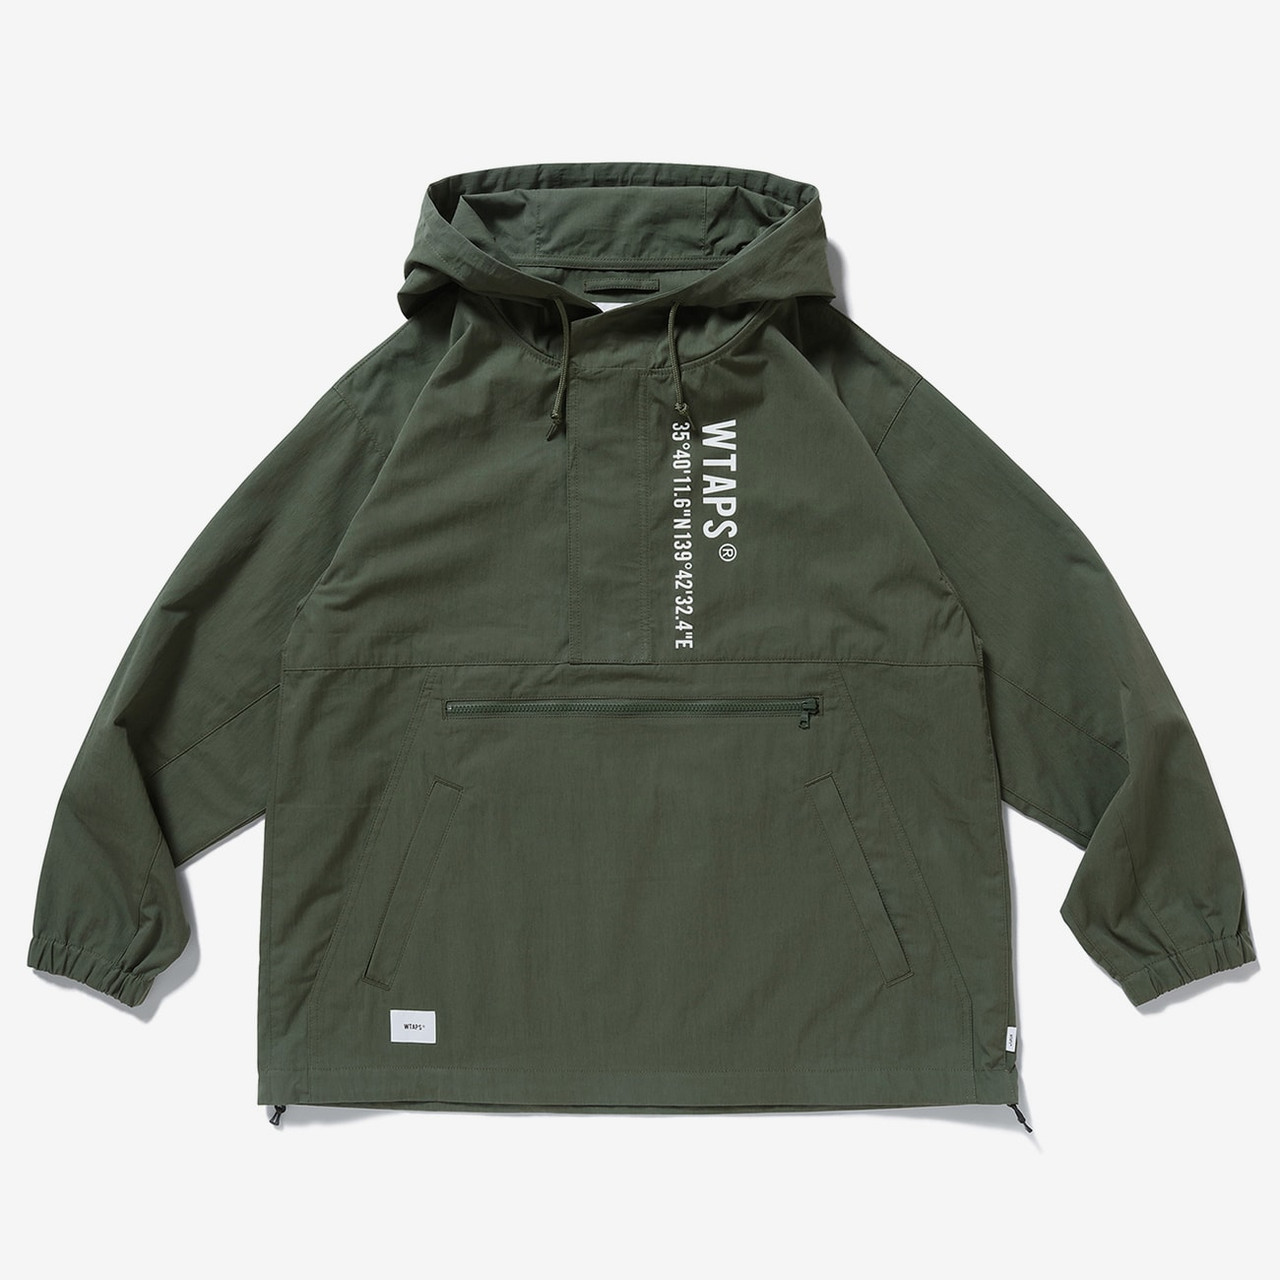 SBS / JACKET / NYCO. WEATHER 221WVDT-JKM02